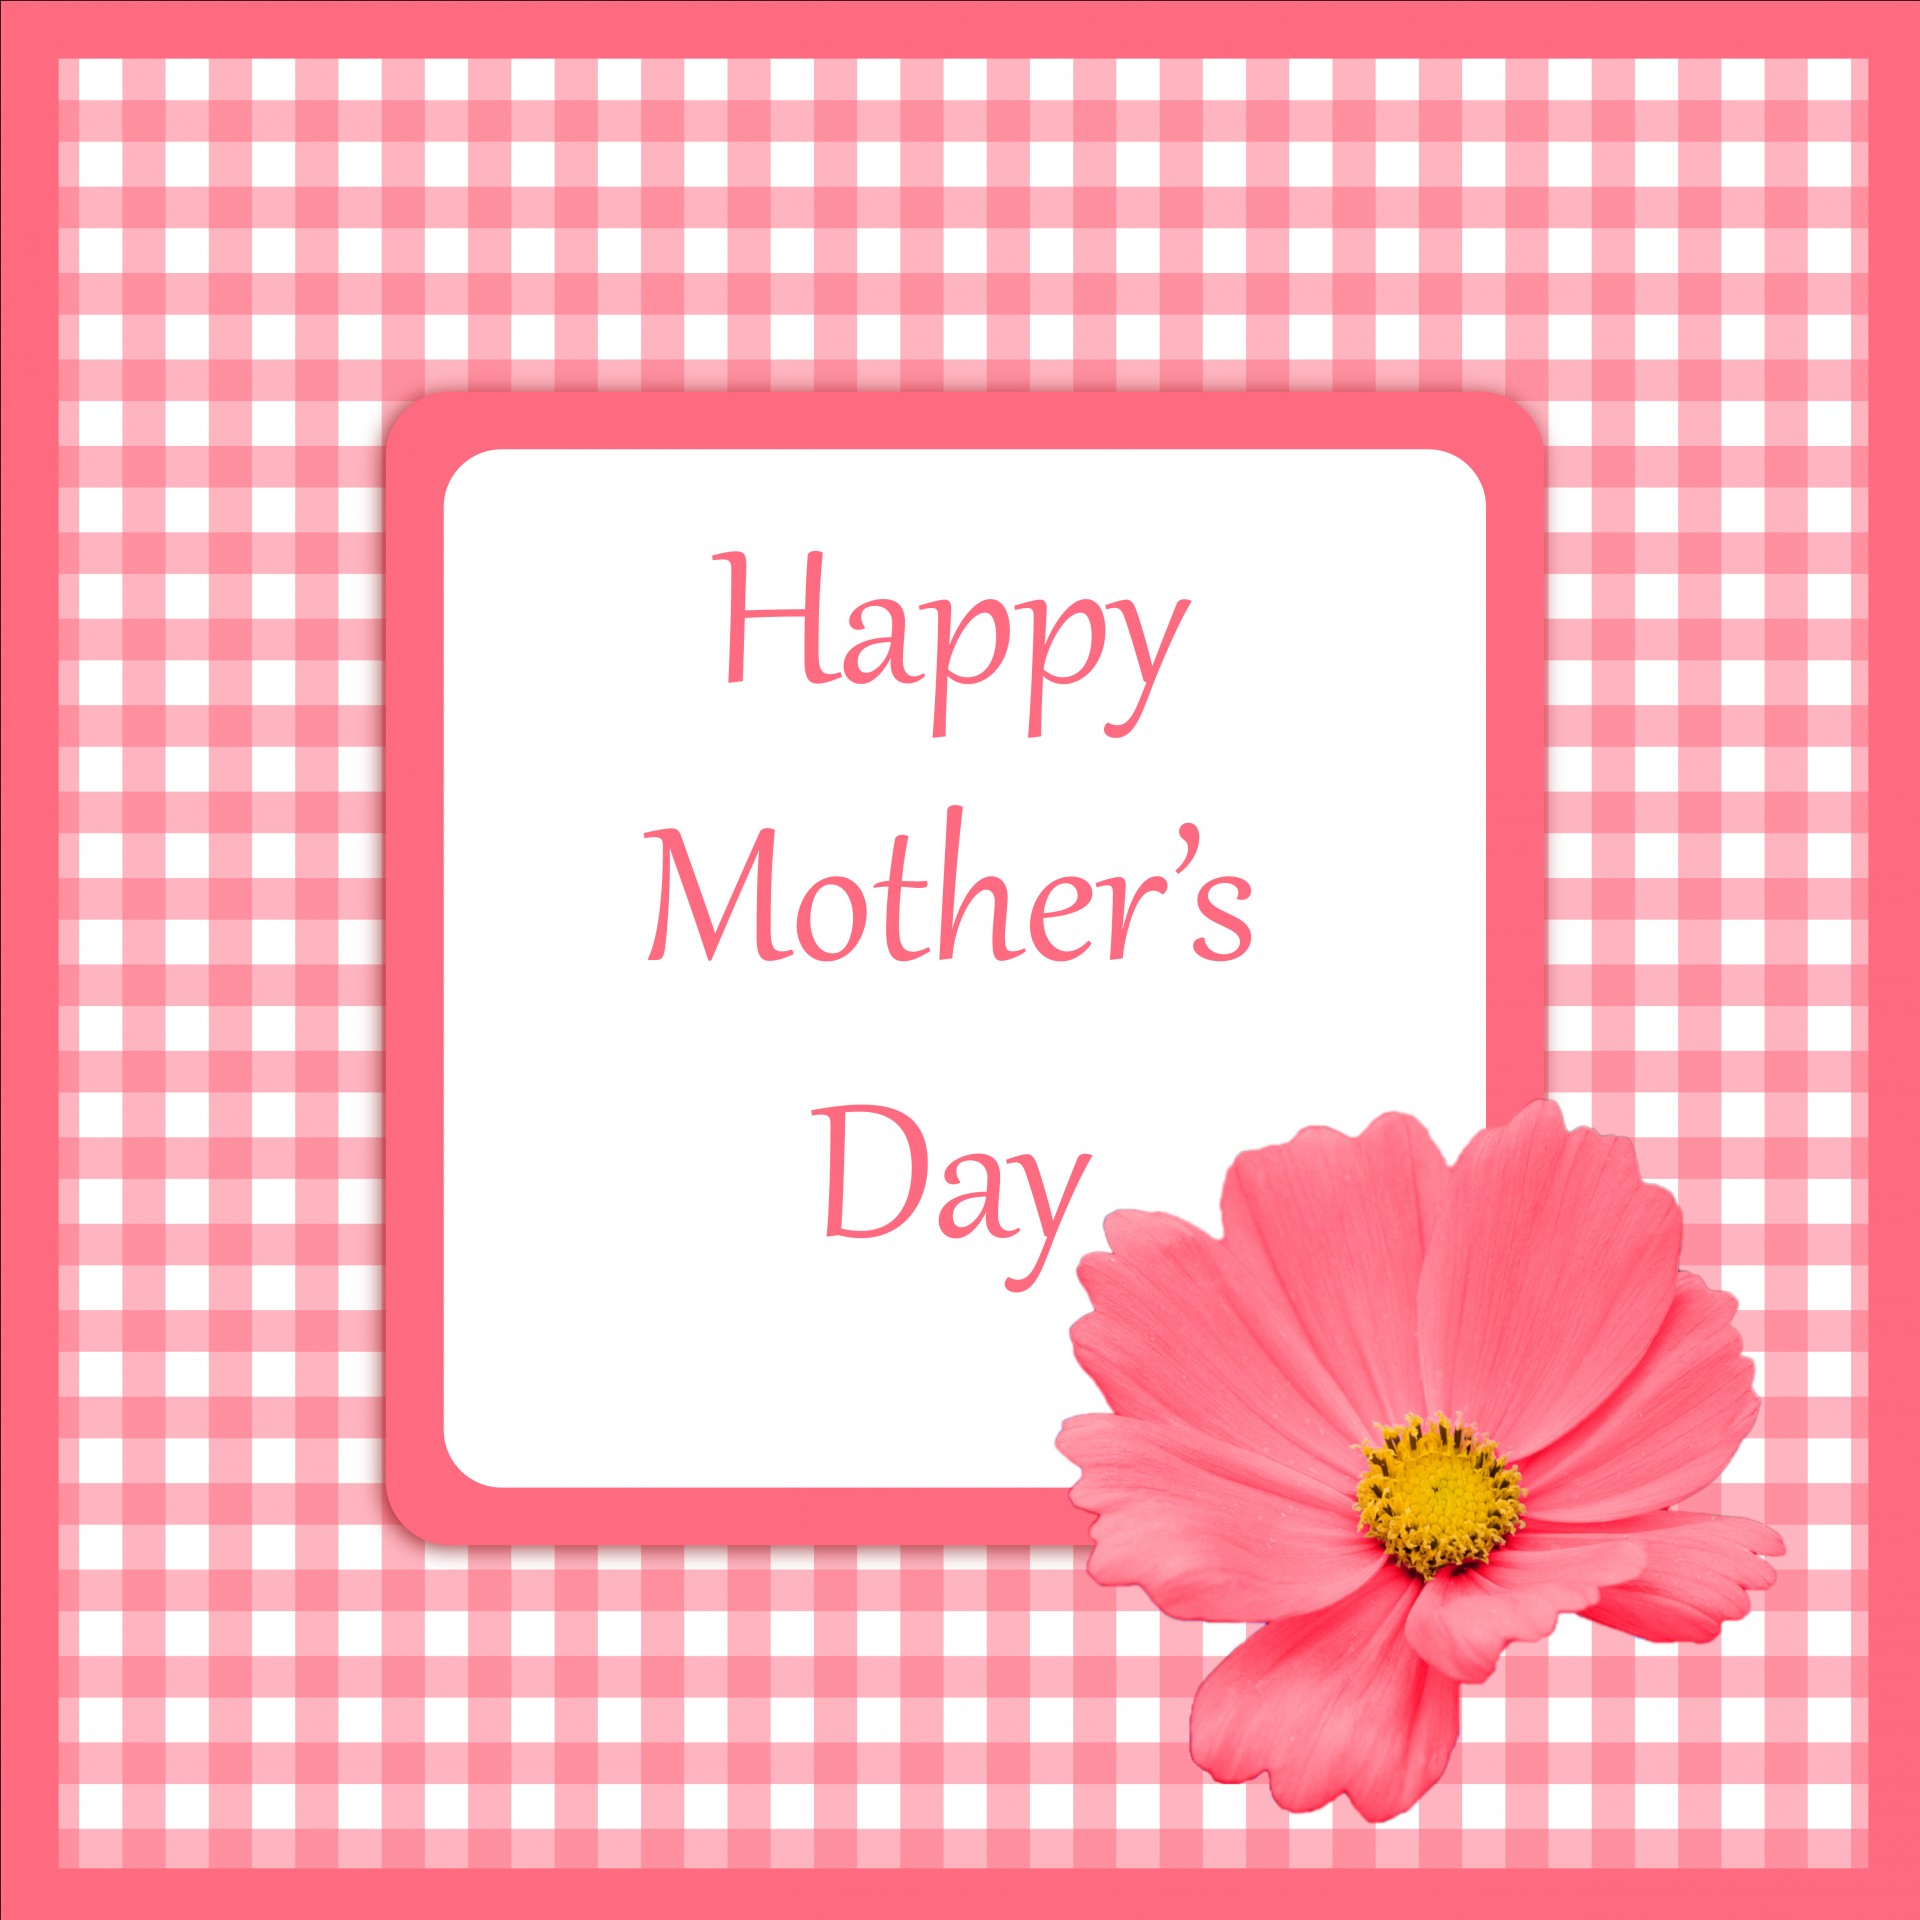 mother-s-day-card-pink-free-stock-photo-public-domain-pictures